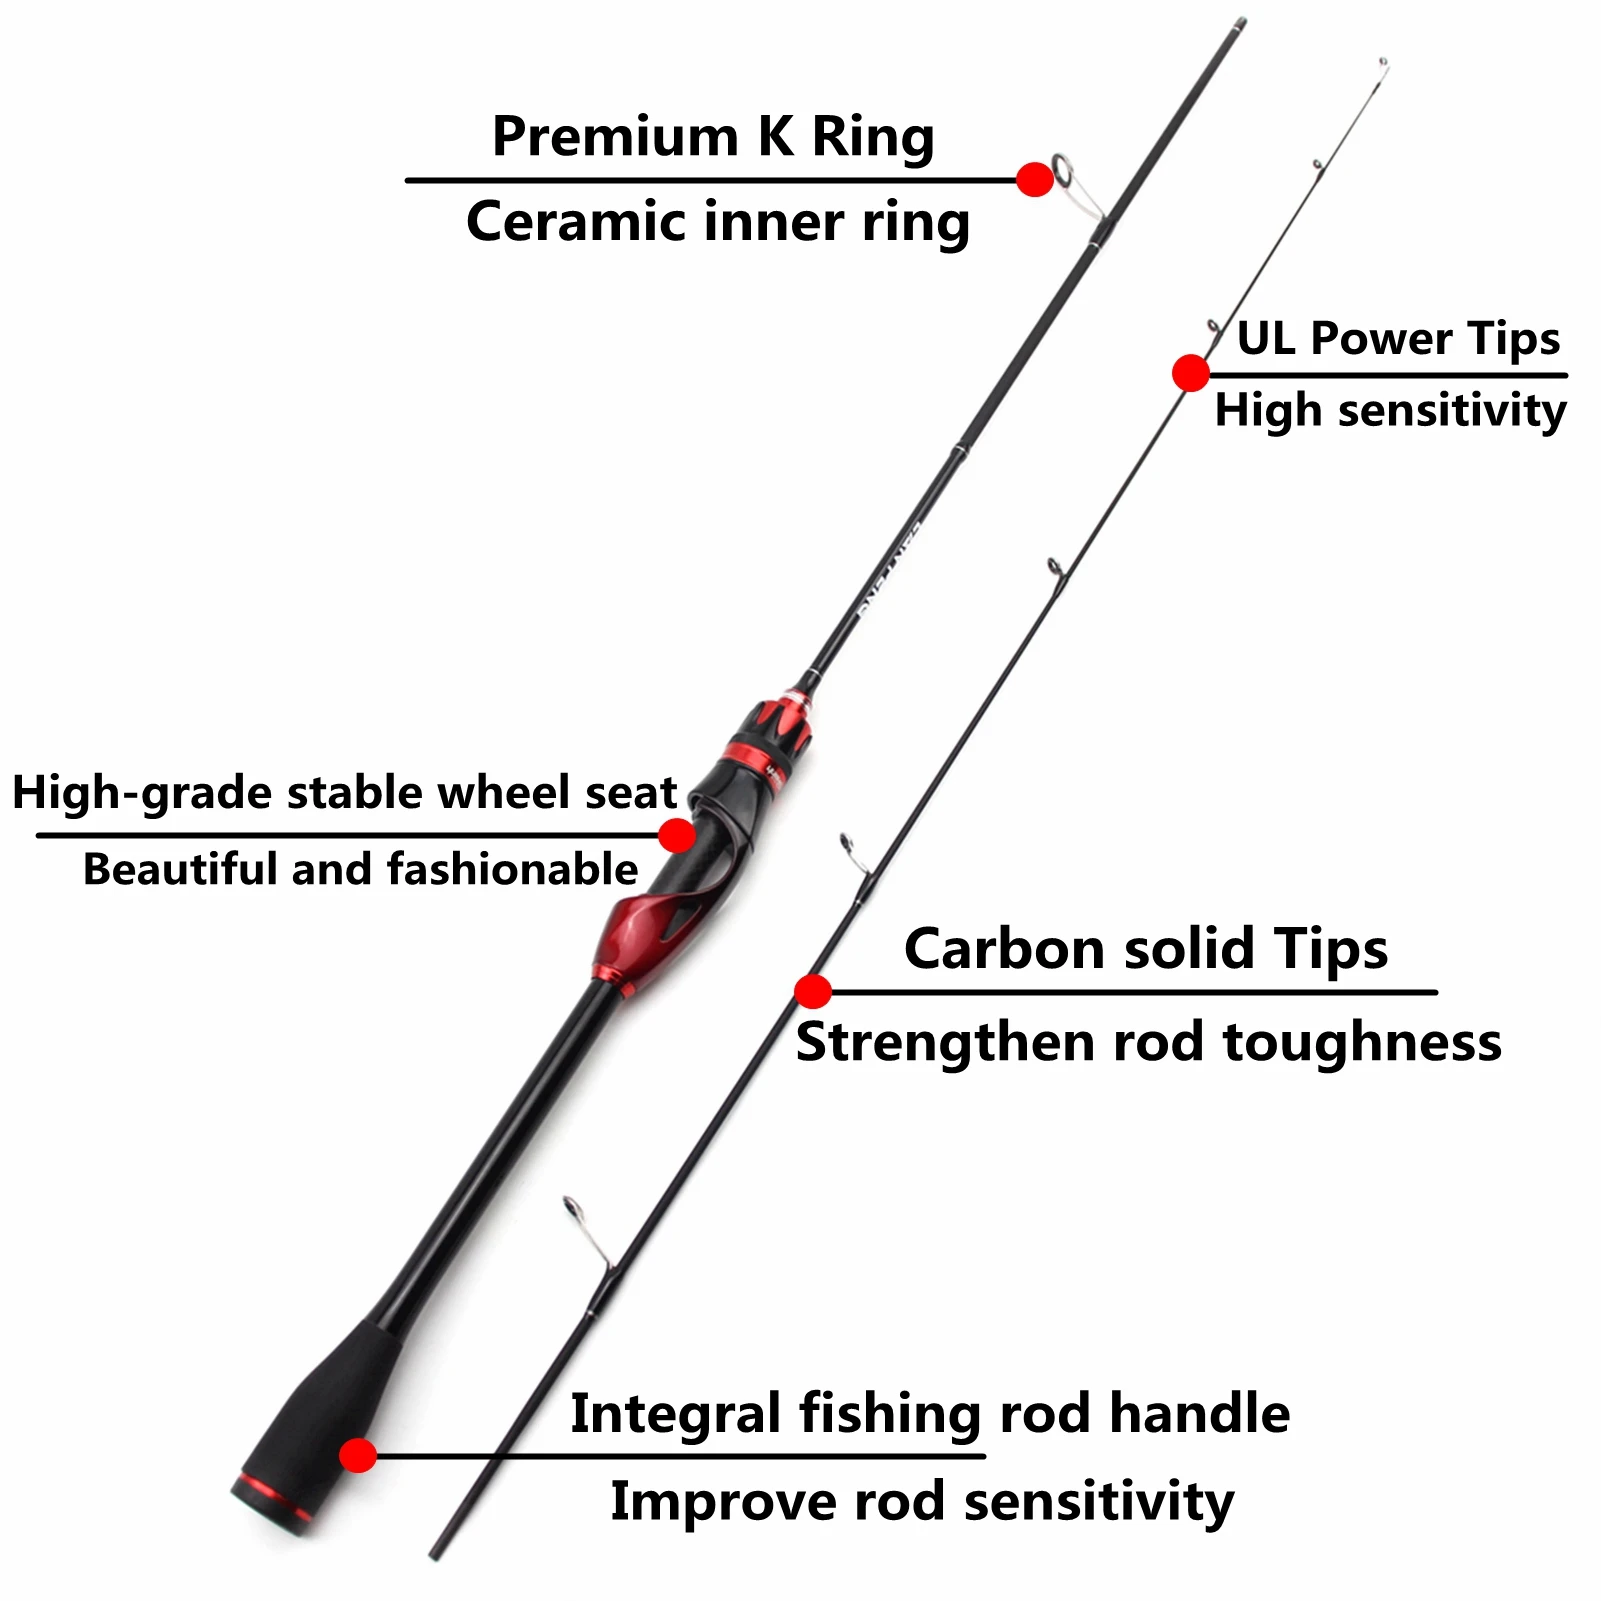 NEW 1.5m 1.68m Ul Slow Spinning Casting Lure Rod 2-8g Lure Ultralight Rods  Ultra Light Solid Tips Pole Fishing Tackle Rod Pesca